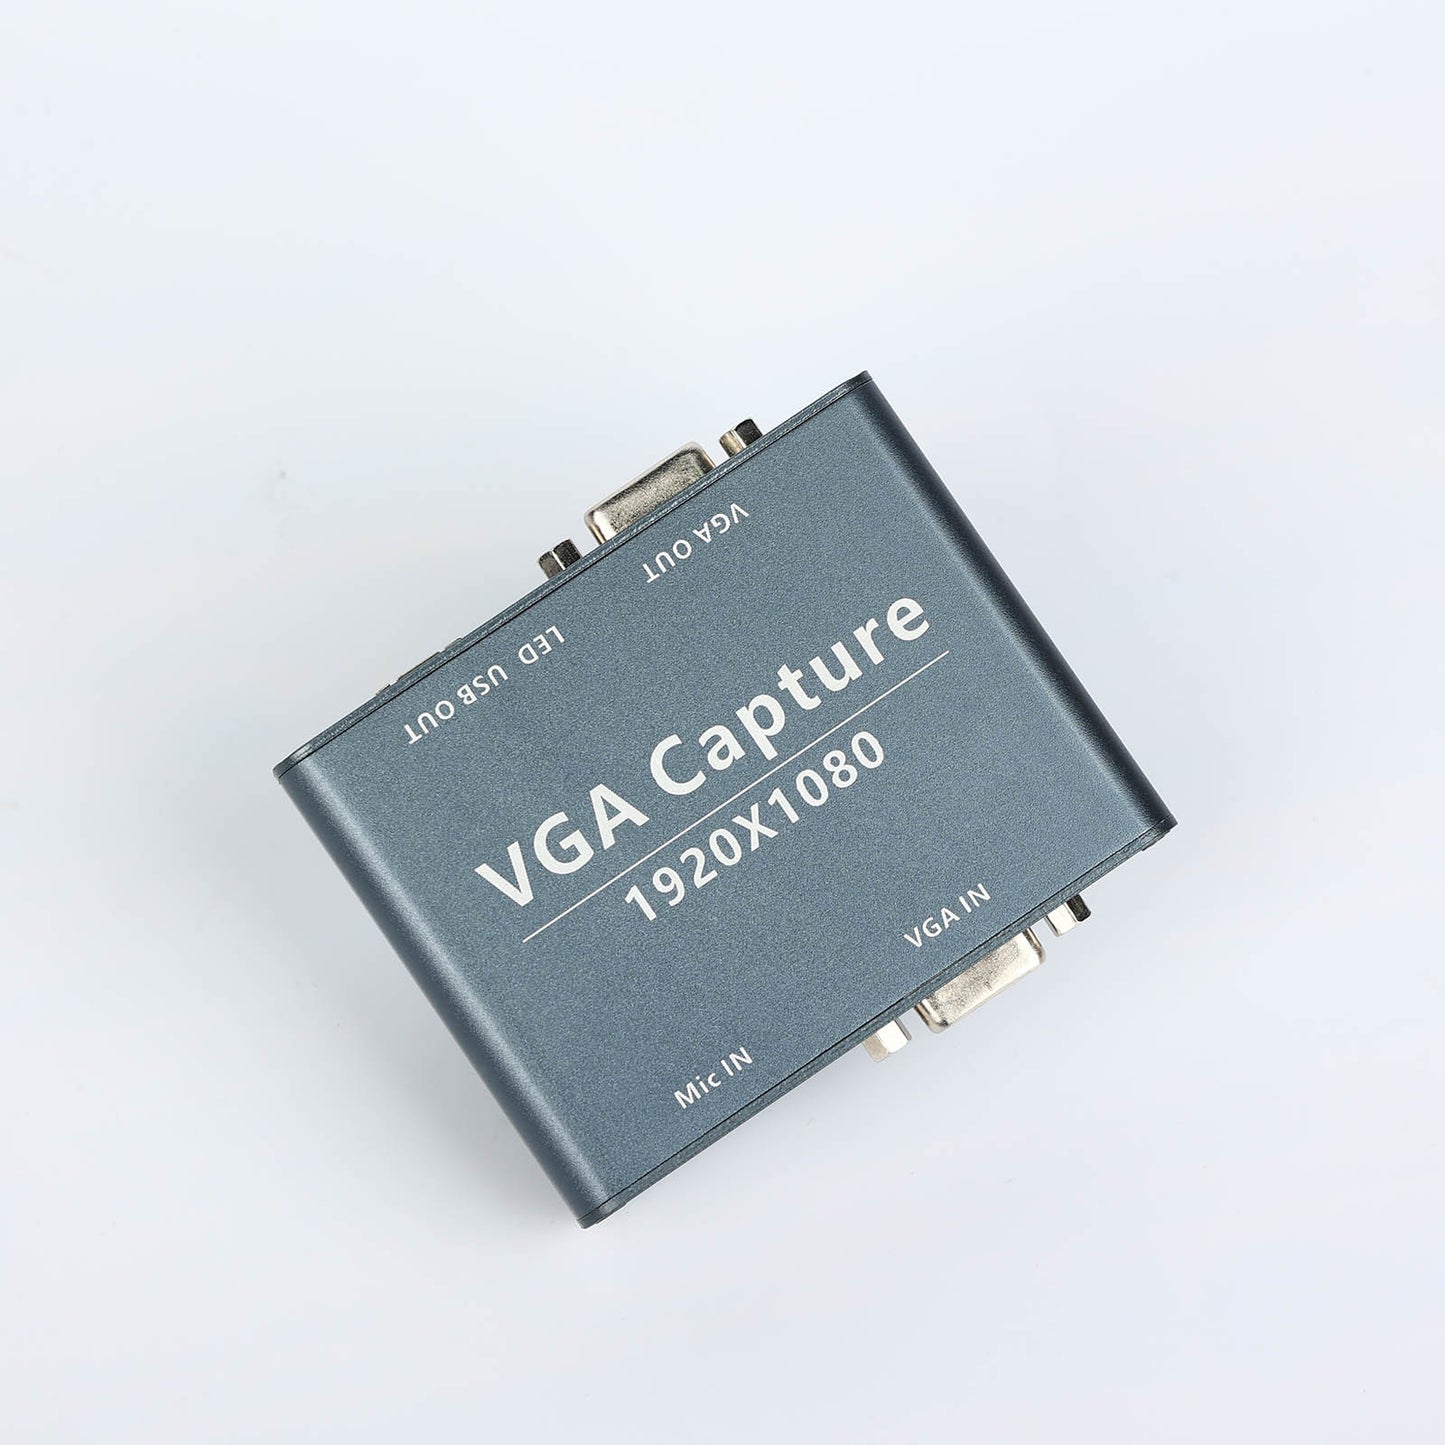 VGA to USB capture 1080P audio and video capture with Video Capture Card support UVC/UAC standard --VGA LOOP output